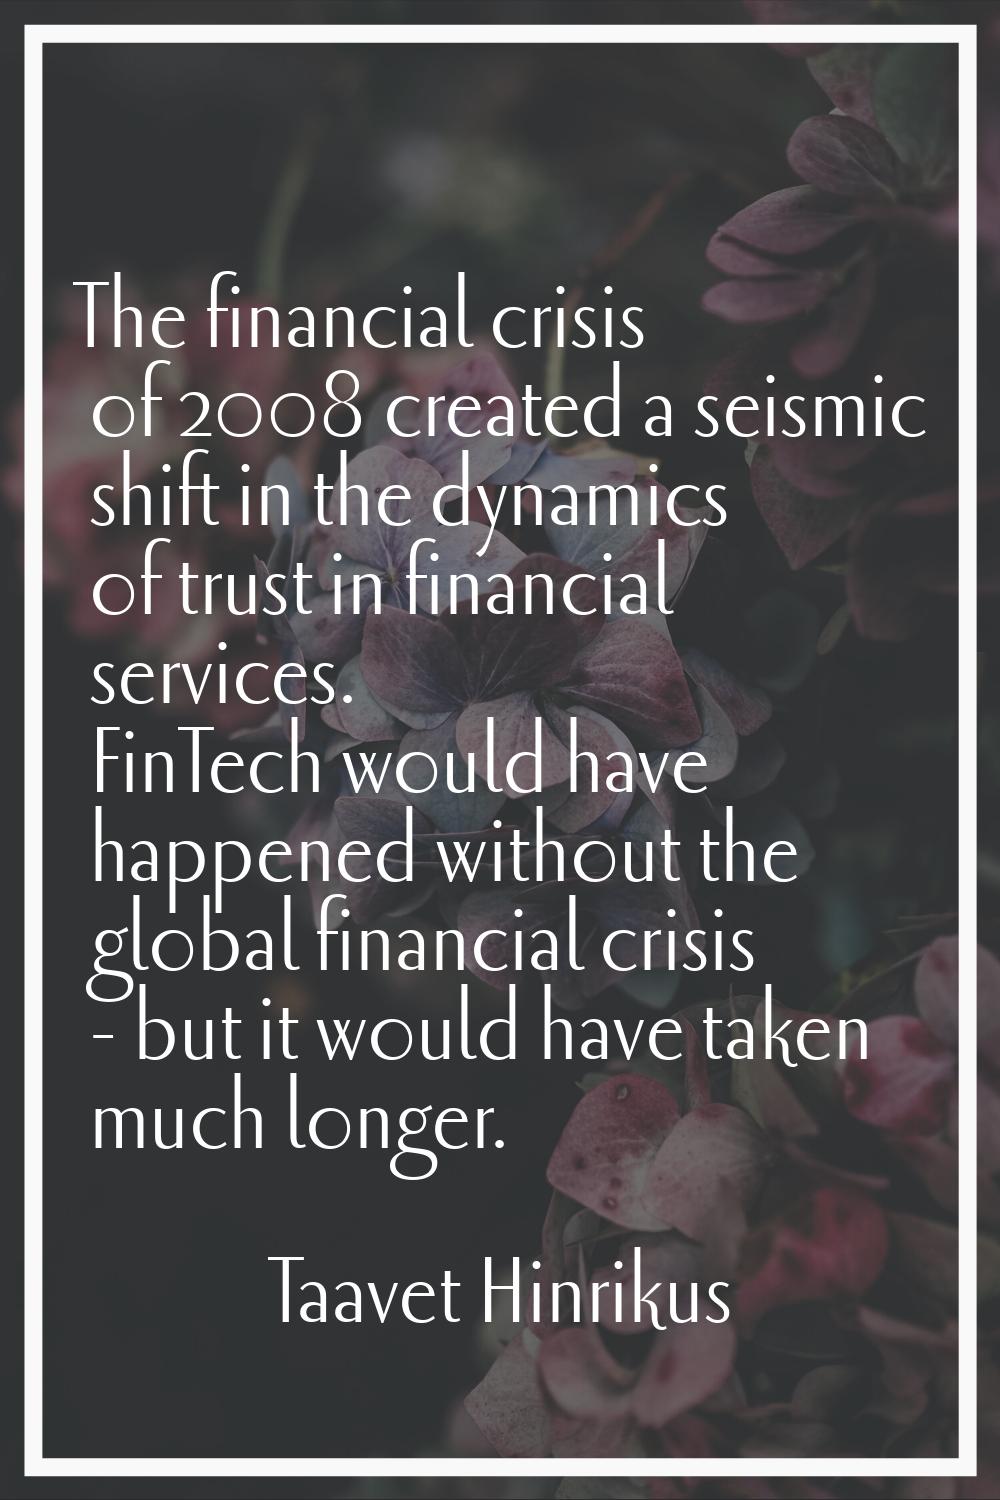 The financial crisis of 2008 created a seismic shift in the dynamics of trust in financial services